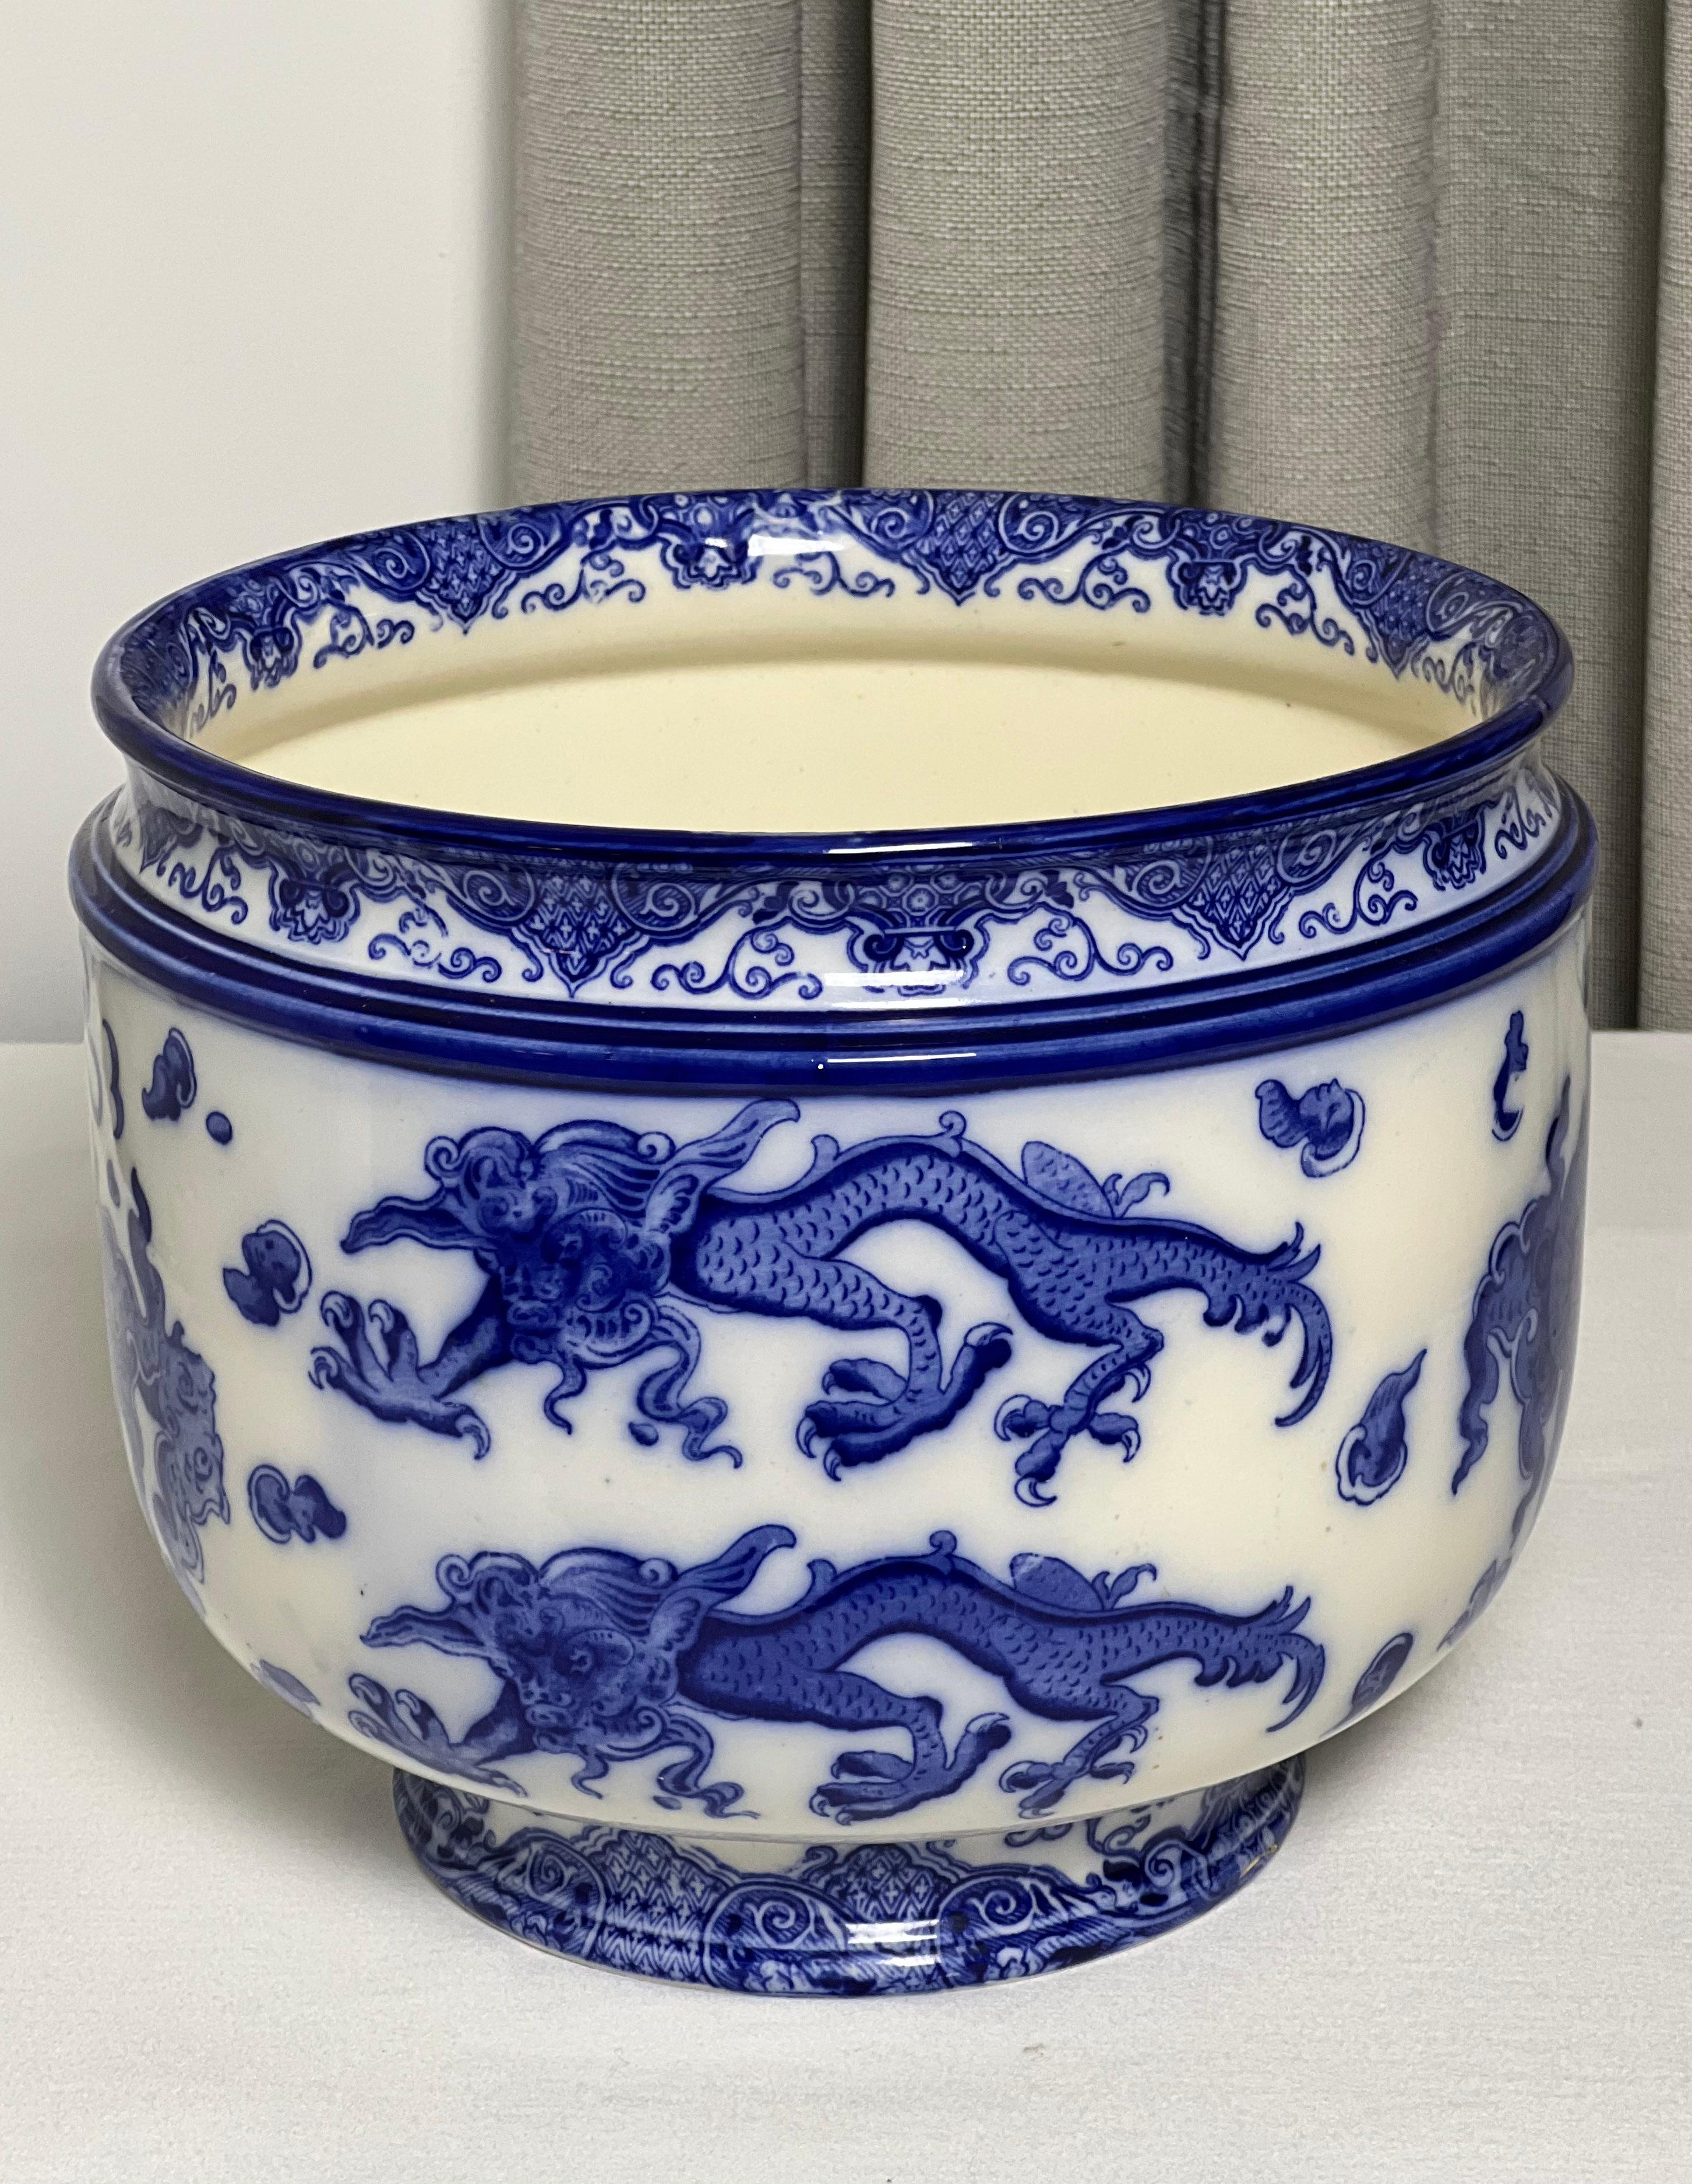 Rare Royal Doulton 'Oyama' pattern porcelain jardinere, circa 1910.

Flow blue jardiniere with a chinoiserie scene of celestial dragons chasing the pearl of wisdom. There is a small crack repair near the base. Royal Doulton backstamp is on the